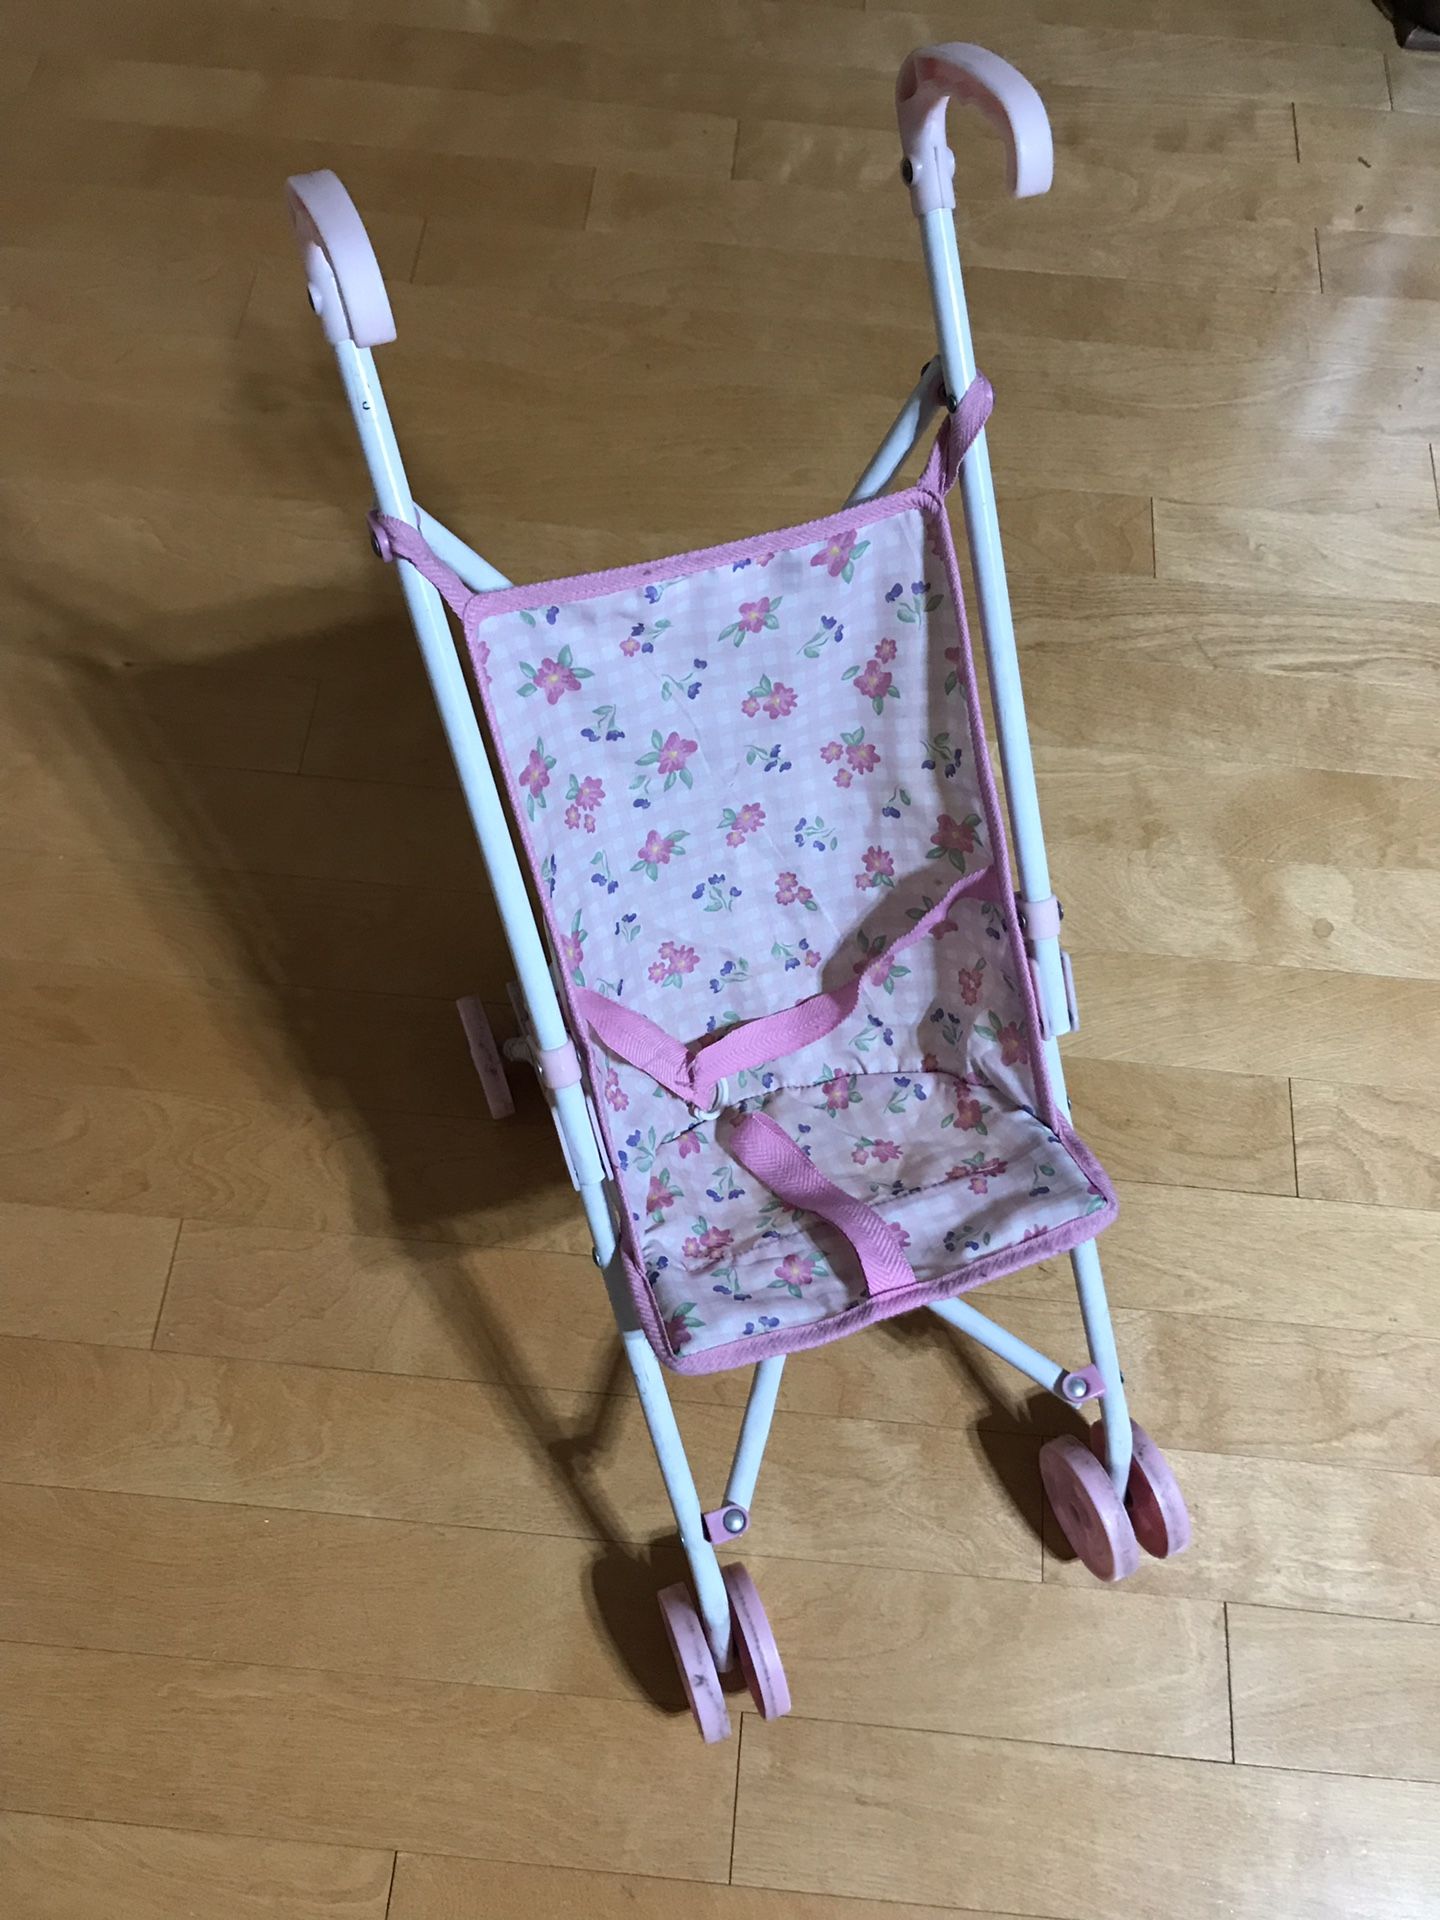 Toy stroller for toddlers/ kids or children